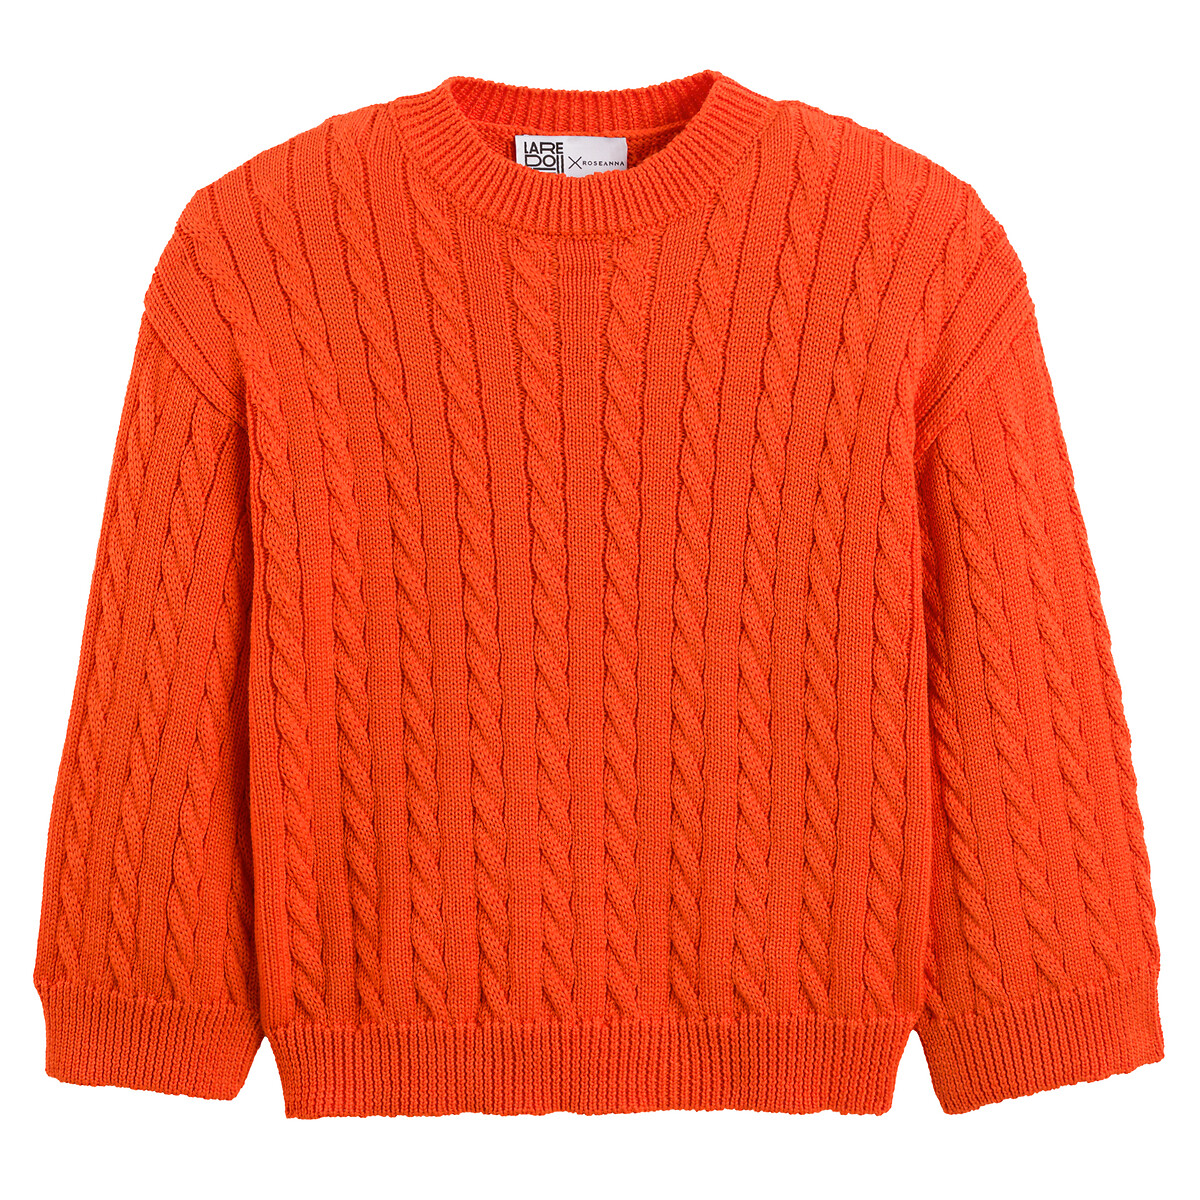 Merino Wool Jumper in Cable Knit with Crew Neck